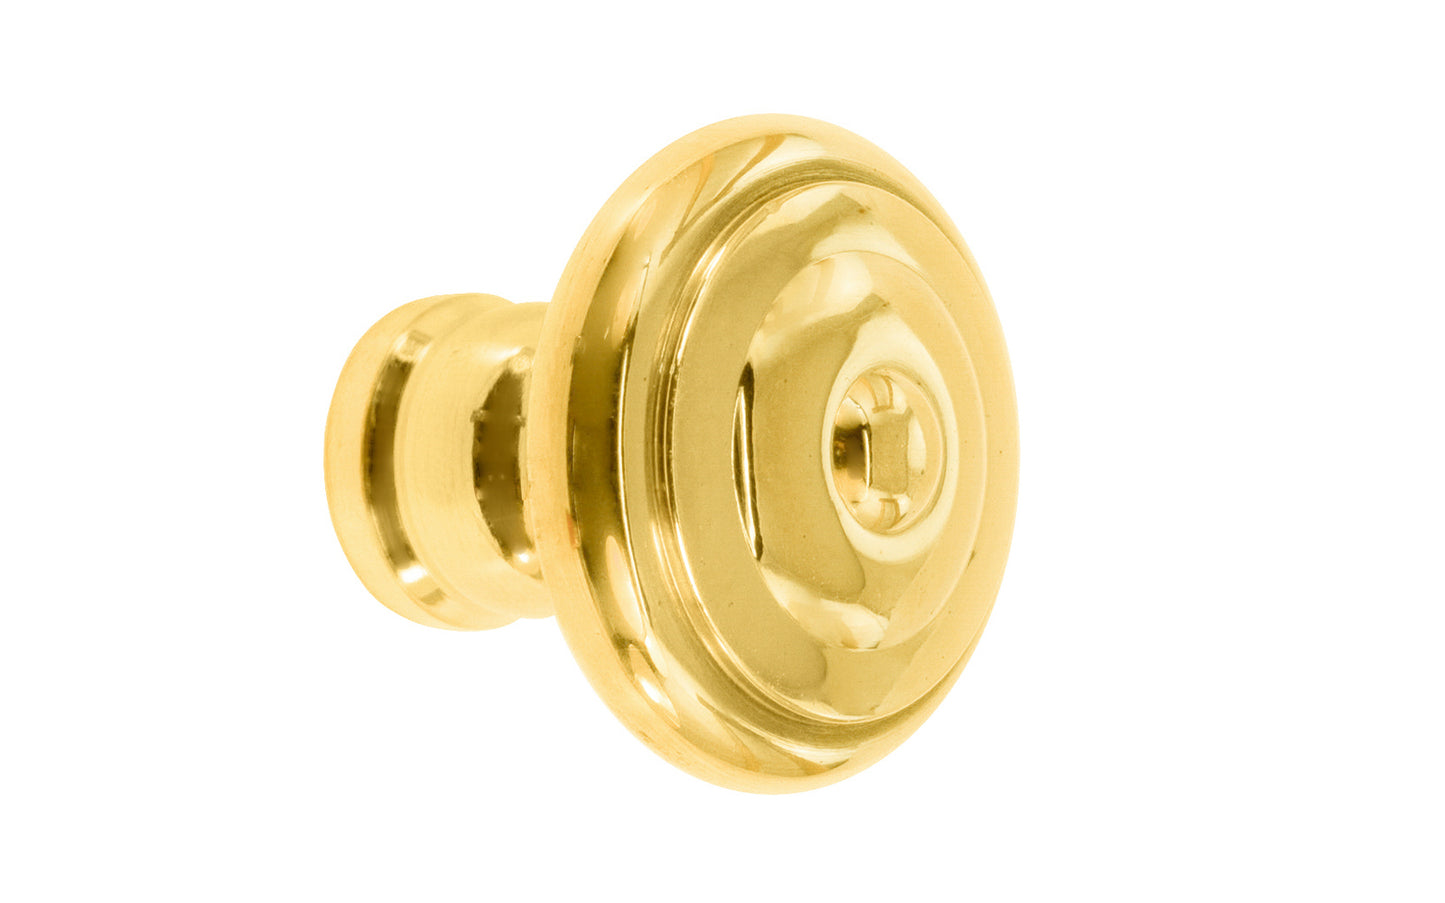 Vintage-style Hardware · Solid Brass classic contemporary style cabinet knob designed in the Mid-Century style. Quality solid brass 1-1/4" diameter Knob. Ideal for kitchen & bathroom cabinets, & furniture. Lacquered brass finish.